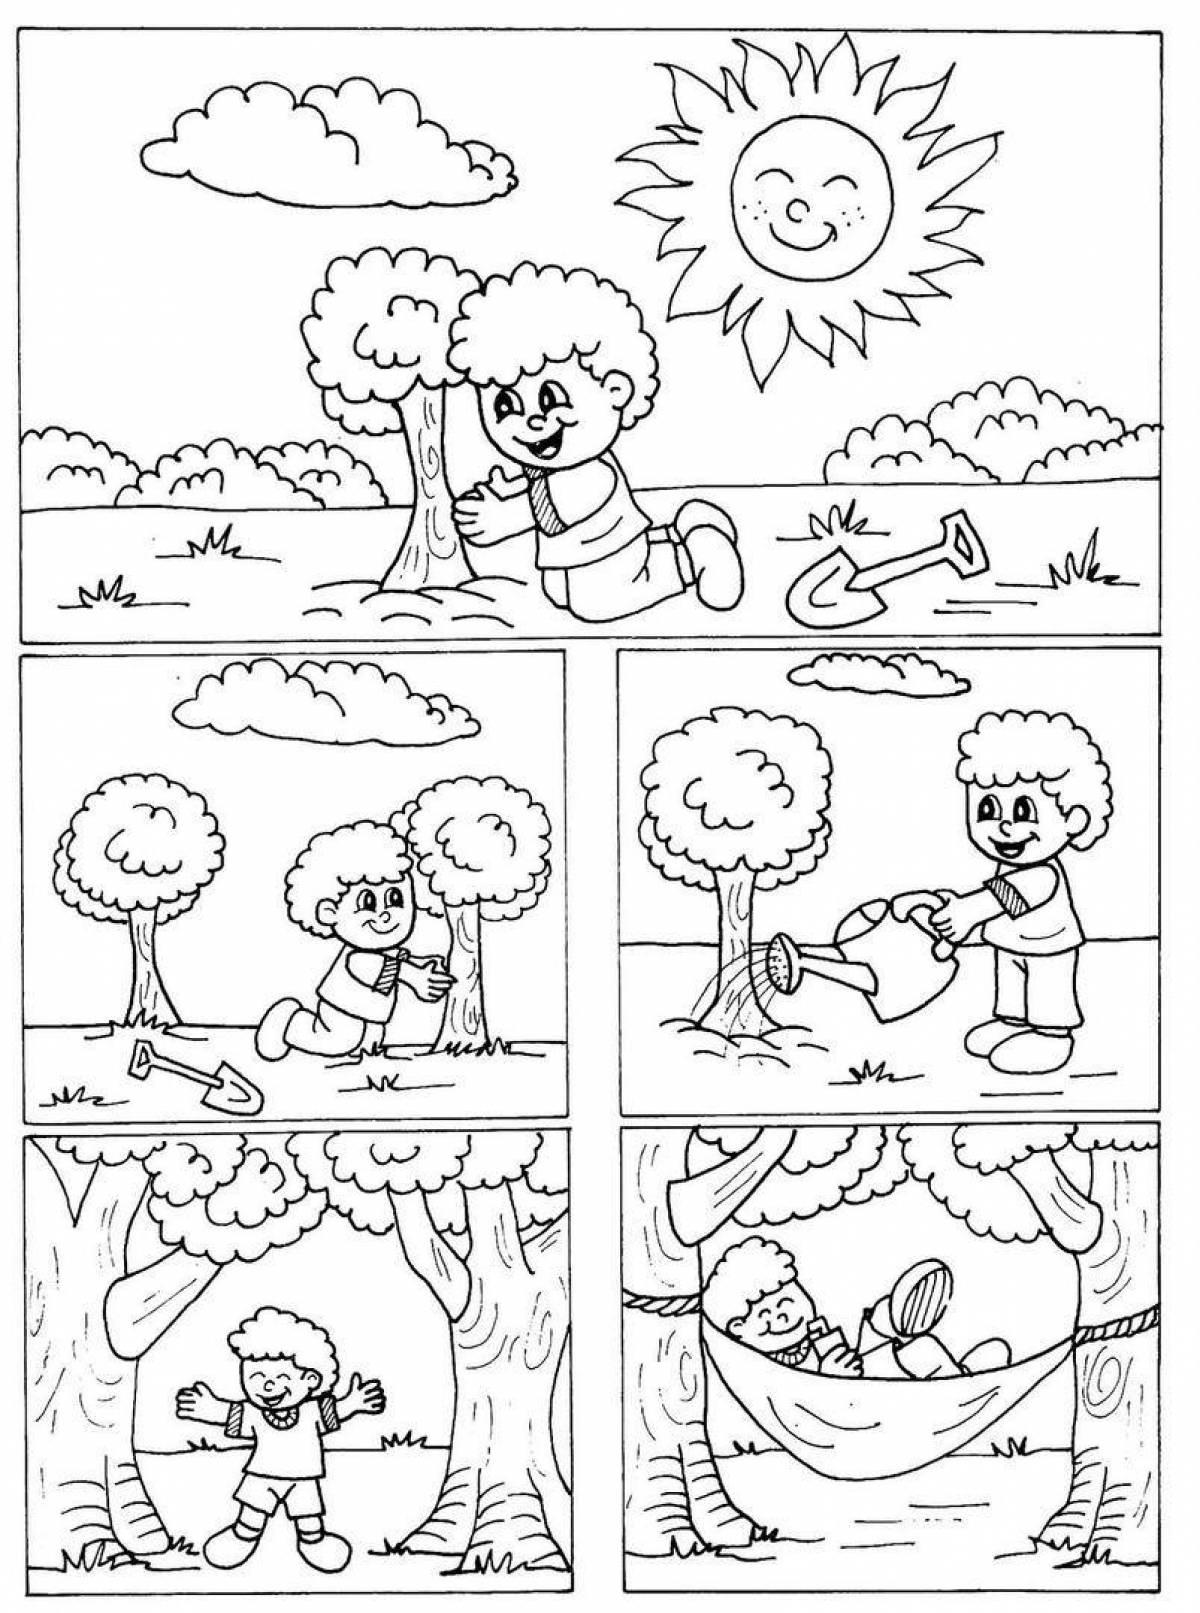 Joyful coloring for children rules of behavior in the forest